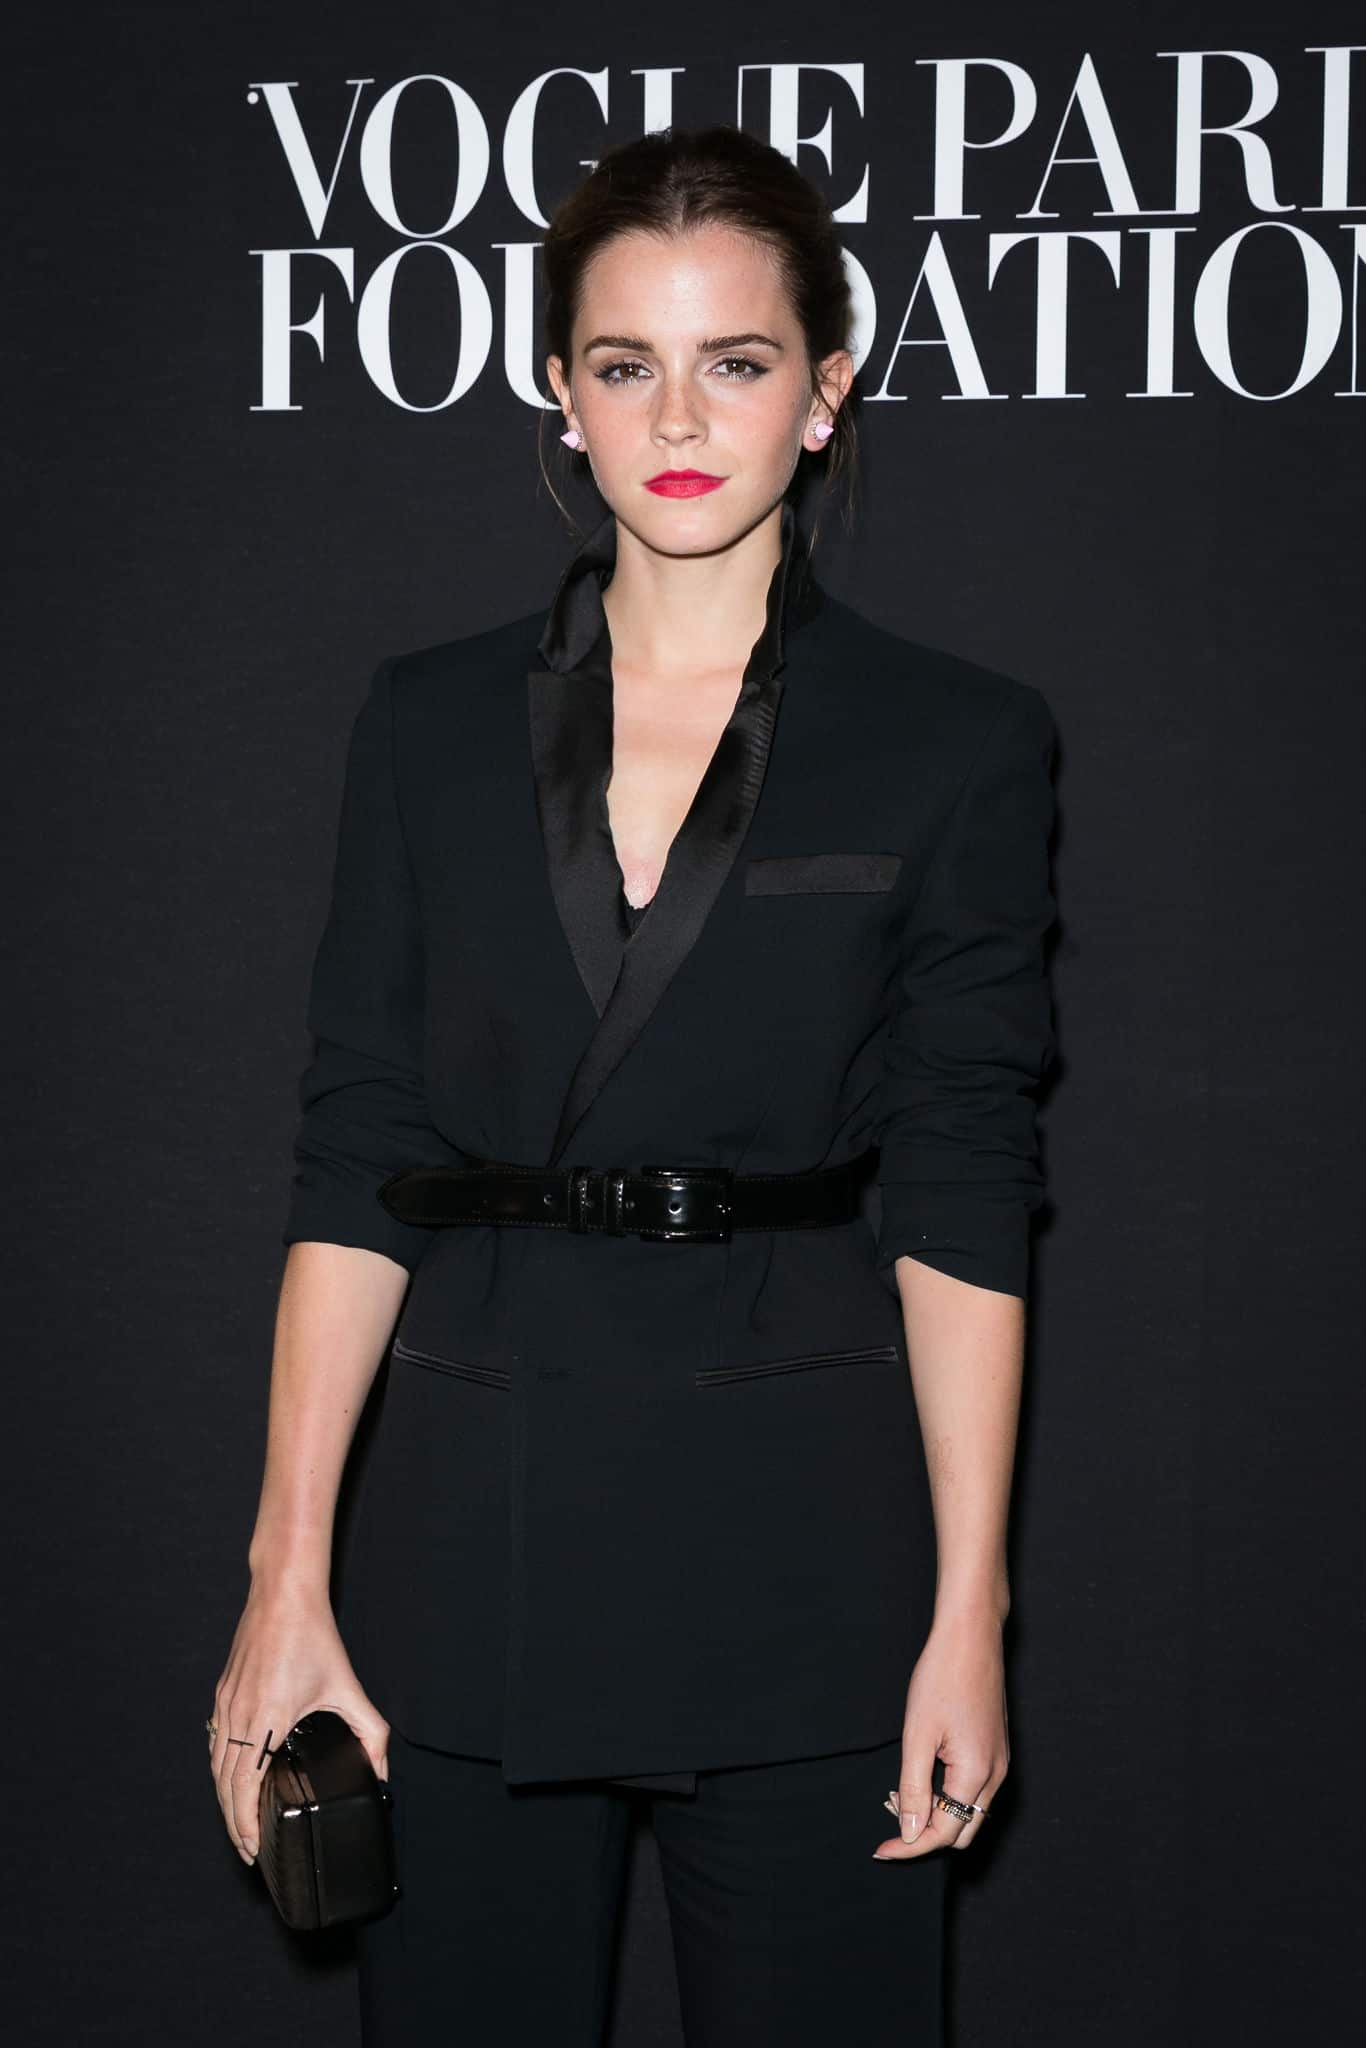 Emma Watson Looks Sensational at the Vogue Foundation Gala in France